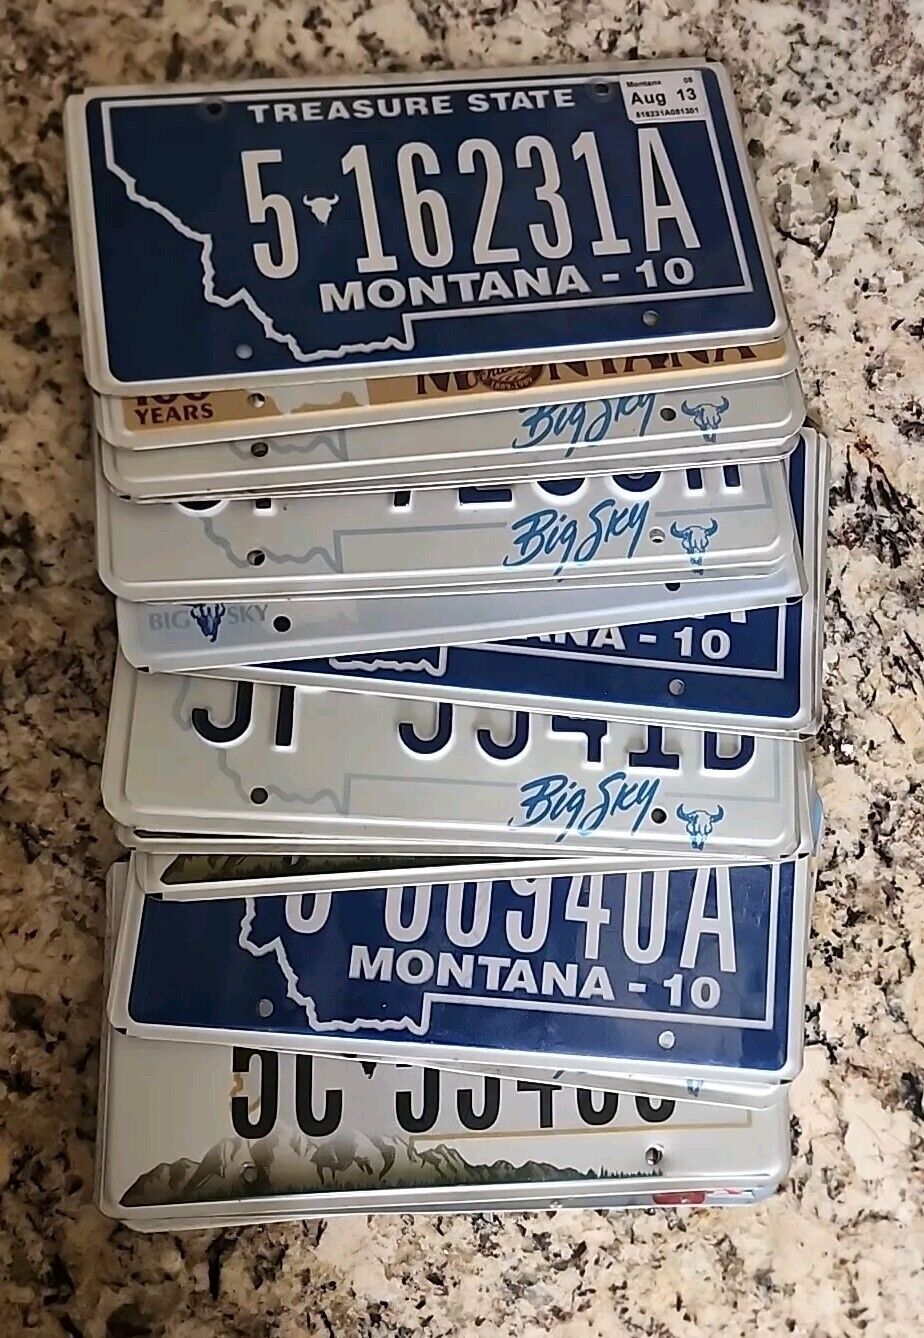 (1) AUTHENTIC EXPIRED MONTANA LICENSE PLATE RANDOM NUMBERS, LETTERS & DESIGNS 